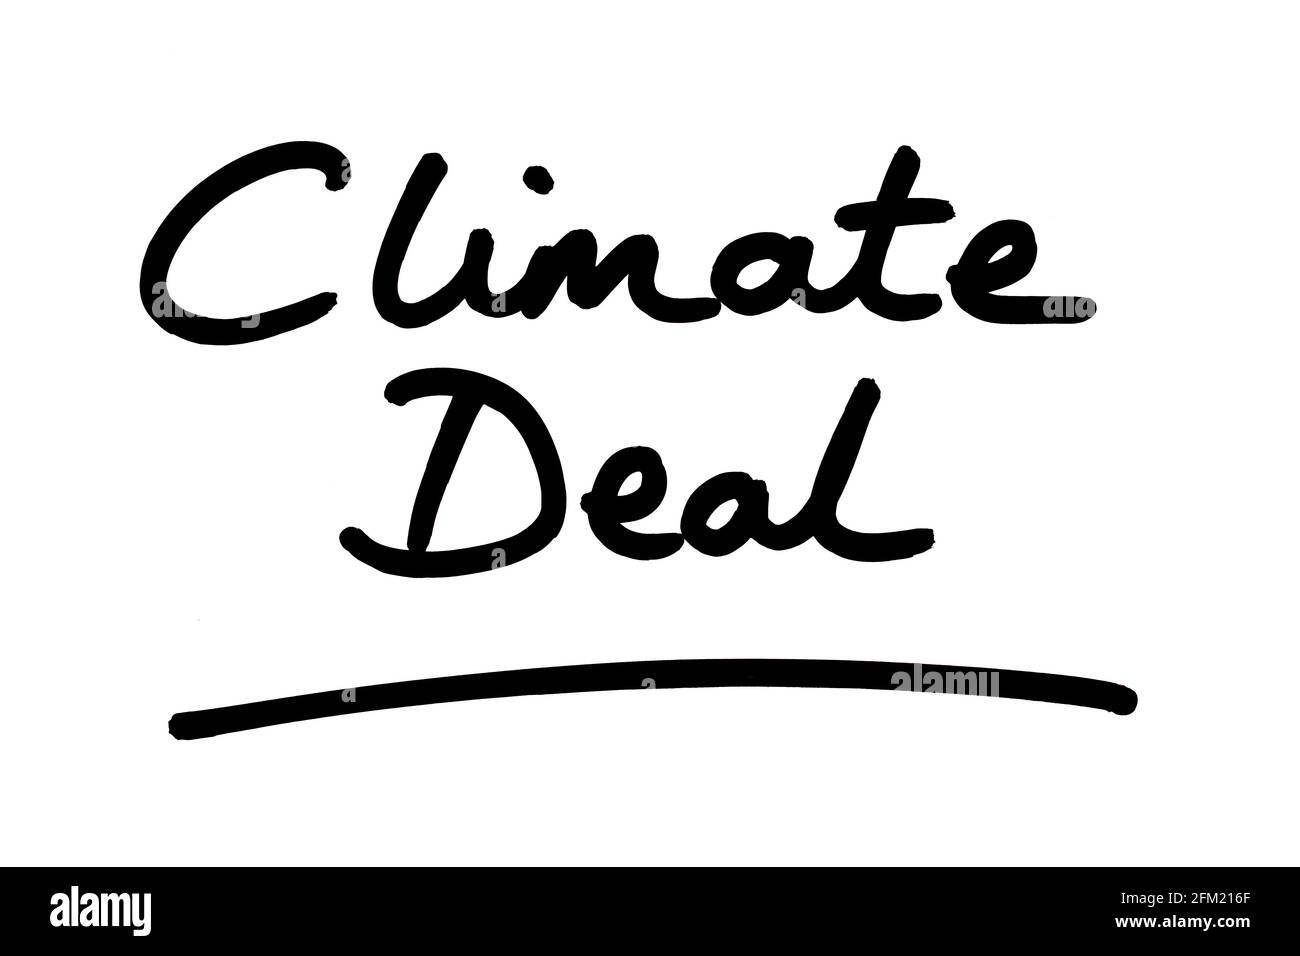 Climate Deal, handwritten on a white background. Stock Photo